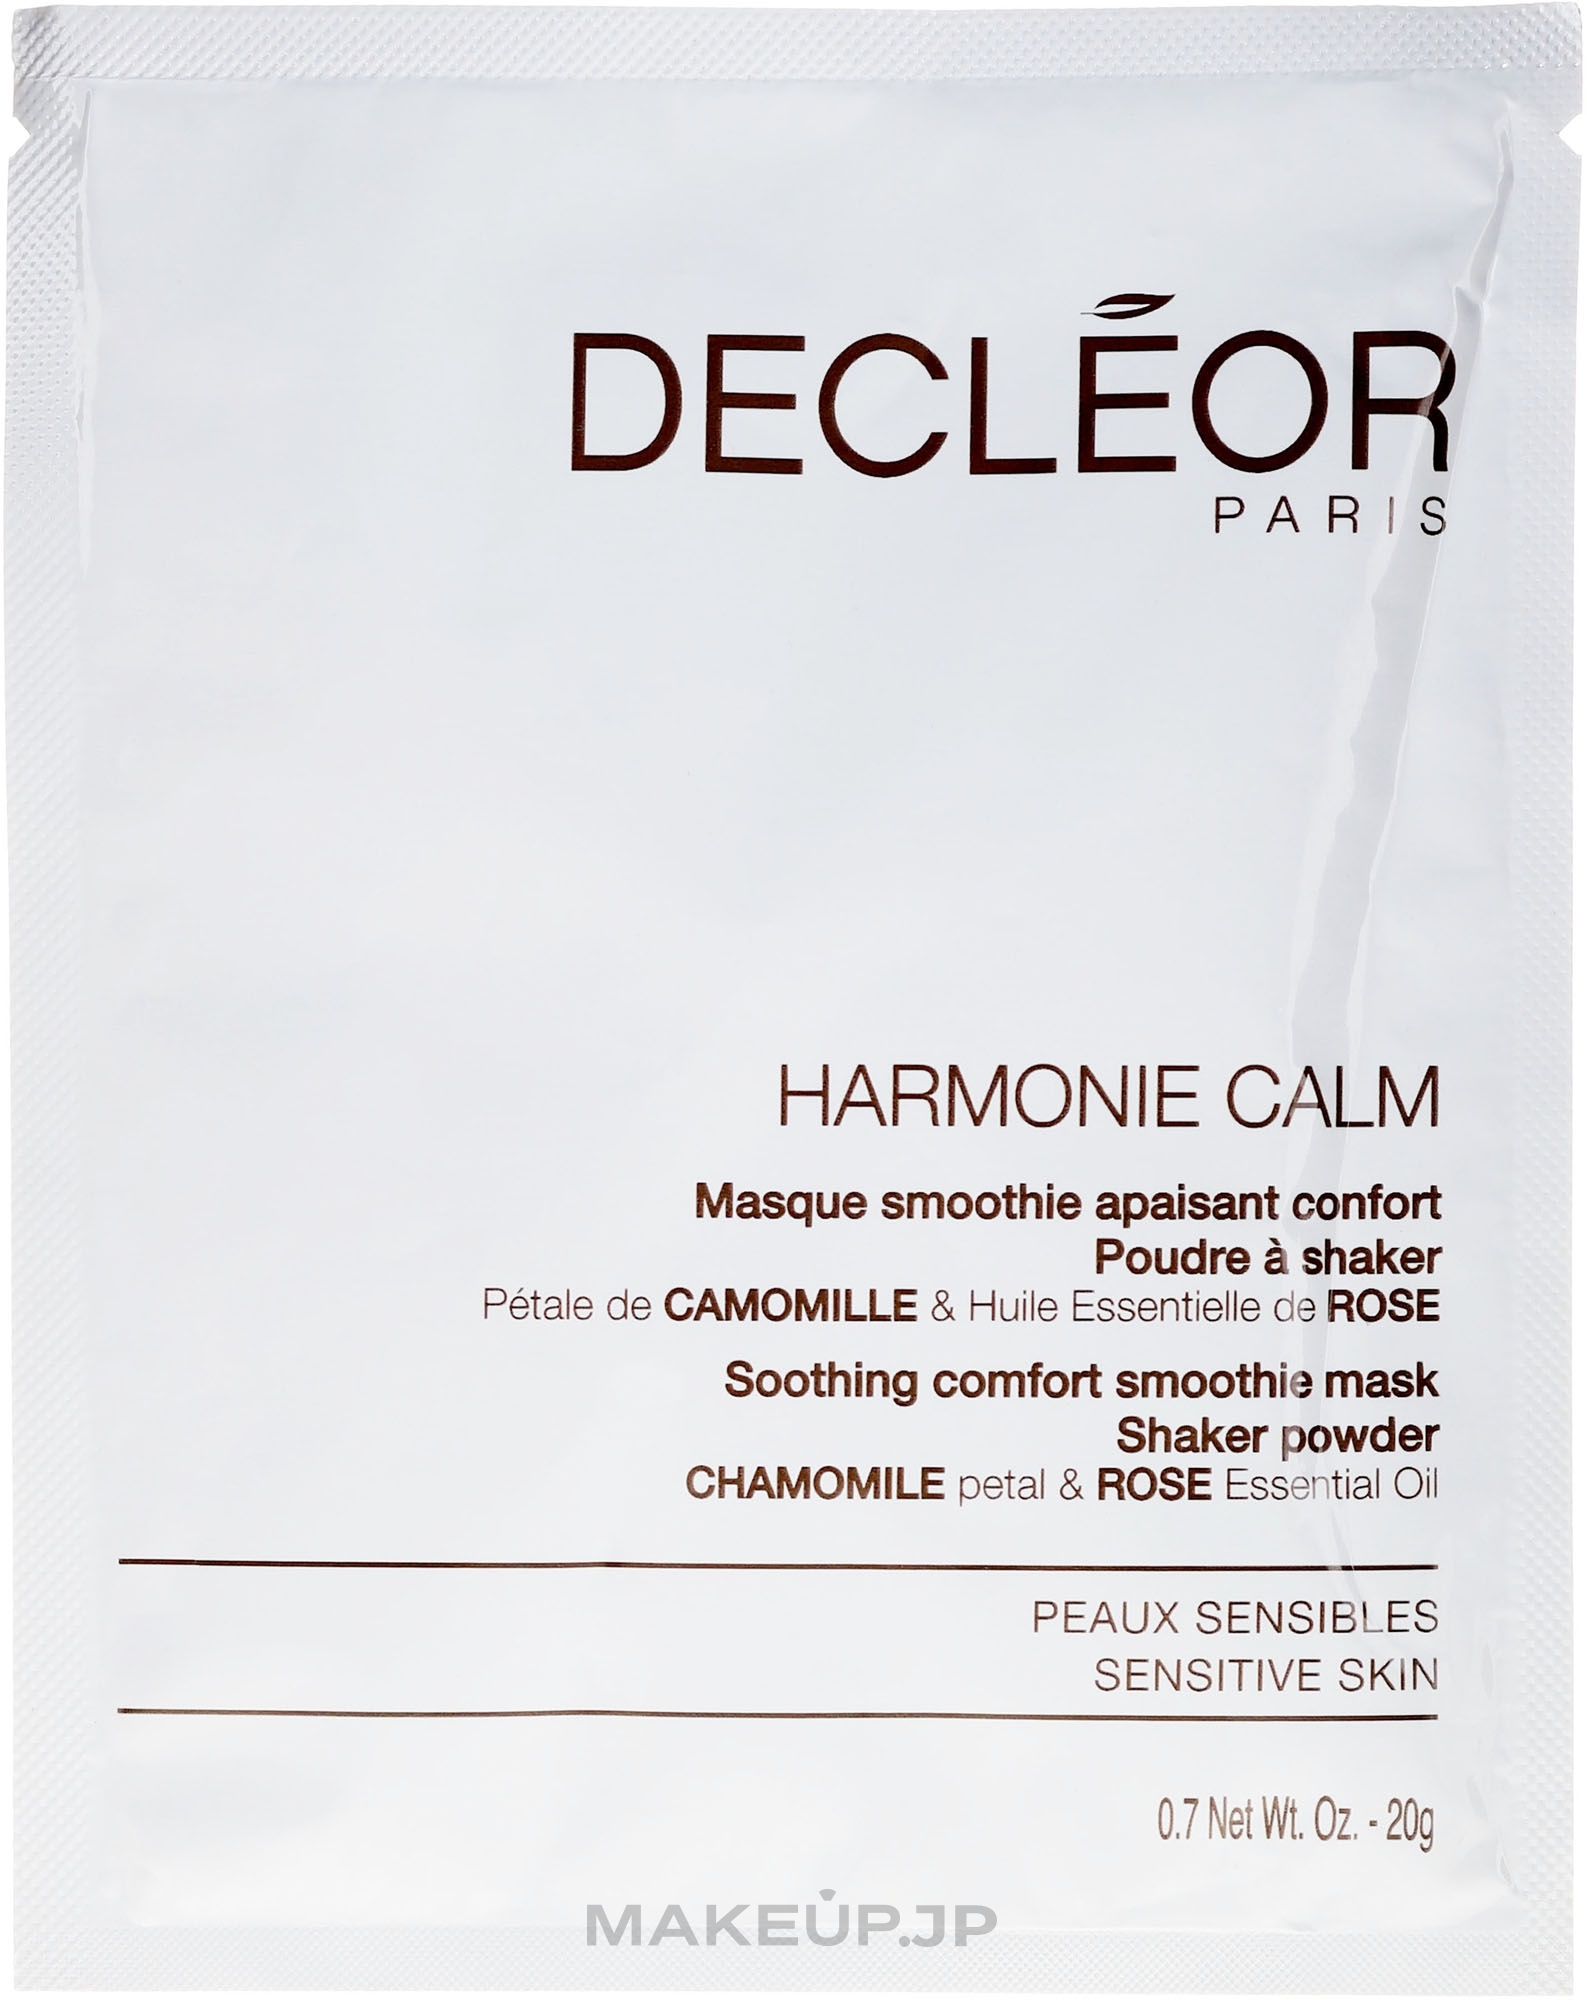 Face Mask - Decleor Harmonie Calm Soothing Comfort Smoothie Mask Shaker Powder — photo 5 x 20 g